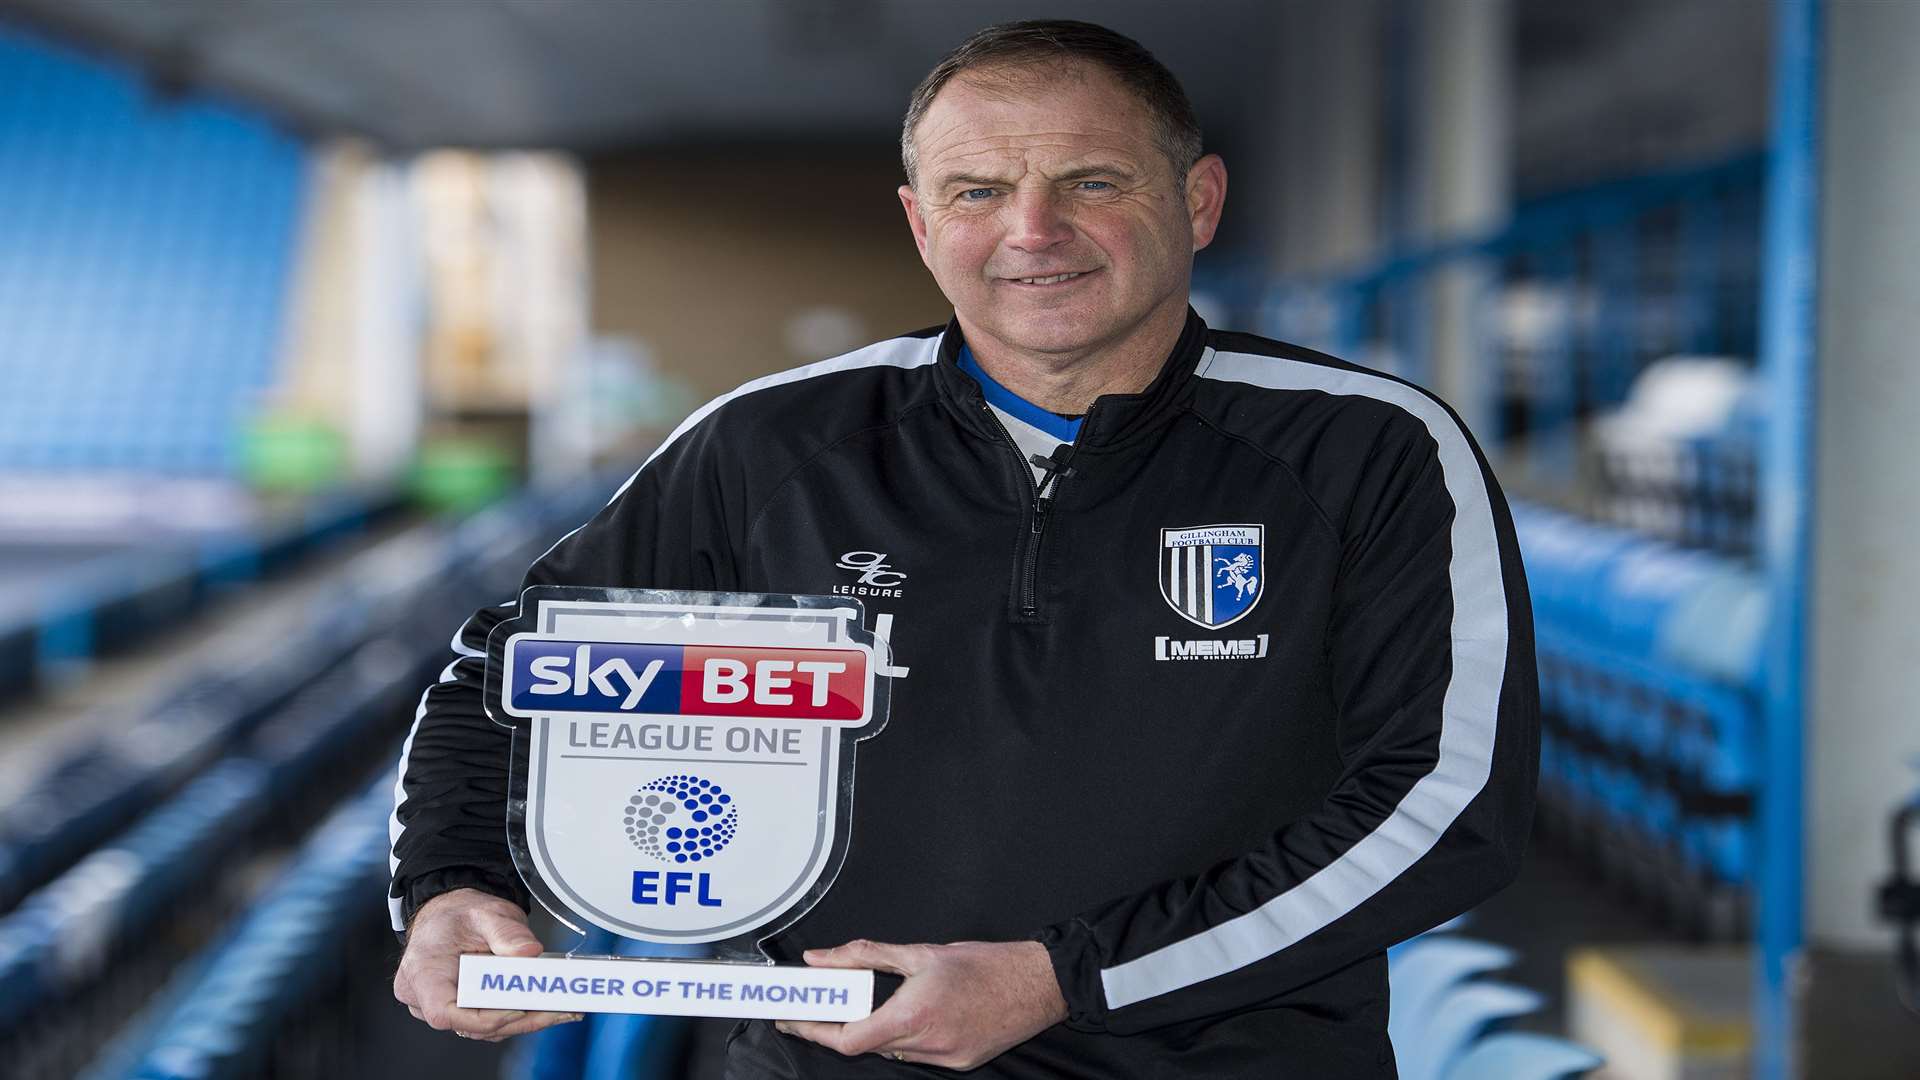 Gillingham boss Steve Lovell with his Sky Bet manager-of-the-month trophy for January Picture: JMP/Sky Bet